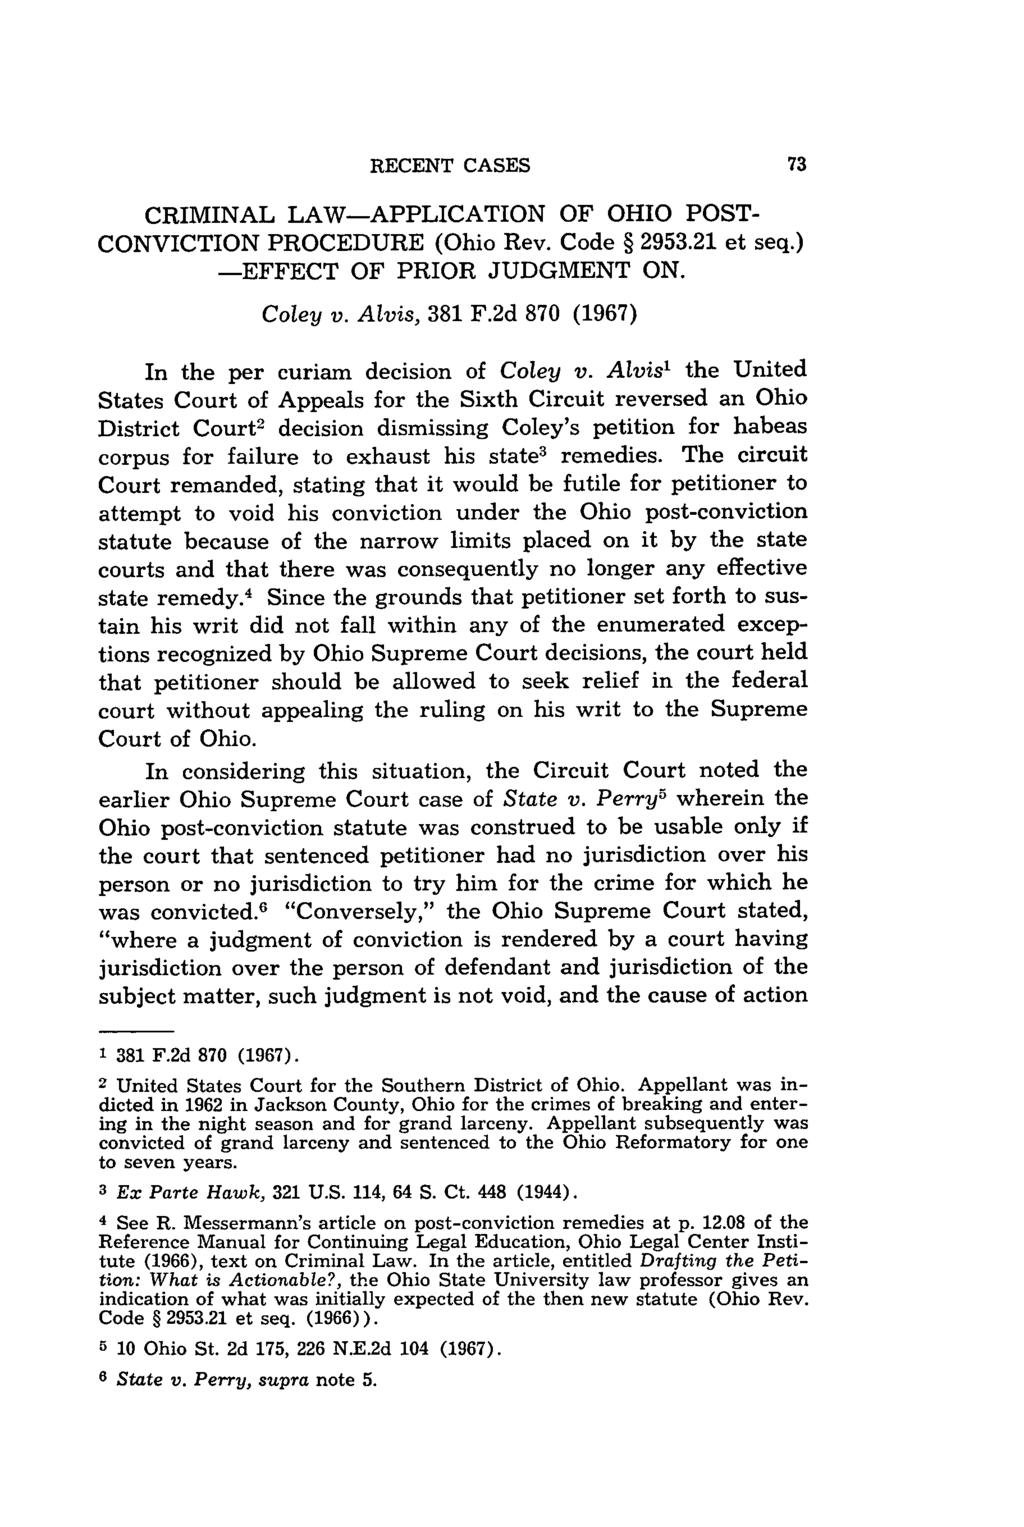 CRIMINAL LAW-APPLICATION OF OHIO POST- CONVICTION PROCEDURE (Ohio Rev. Code 2953.21 et seq.) -EFFECT OF PRIOR JUDGMENT ON. Coley v. Alvis, 381 F.2d 870 (1967) In the per curiam decision of Coley v.